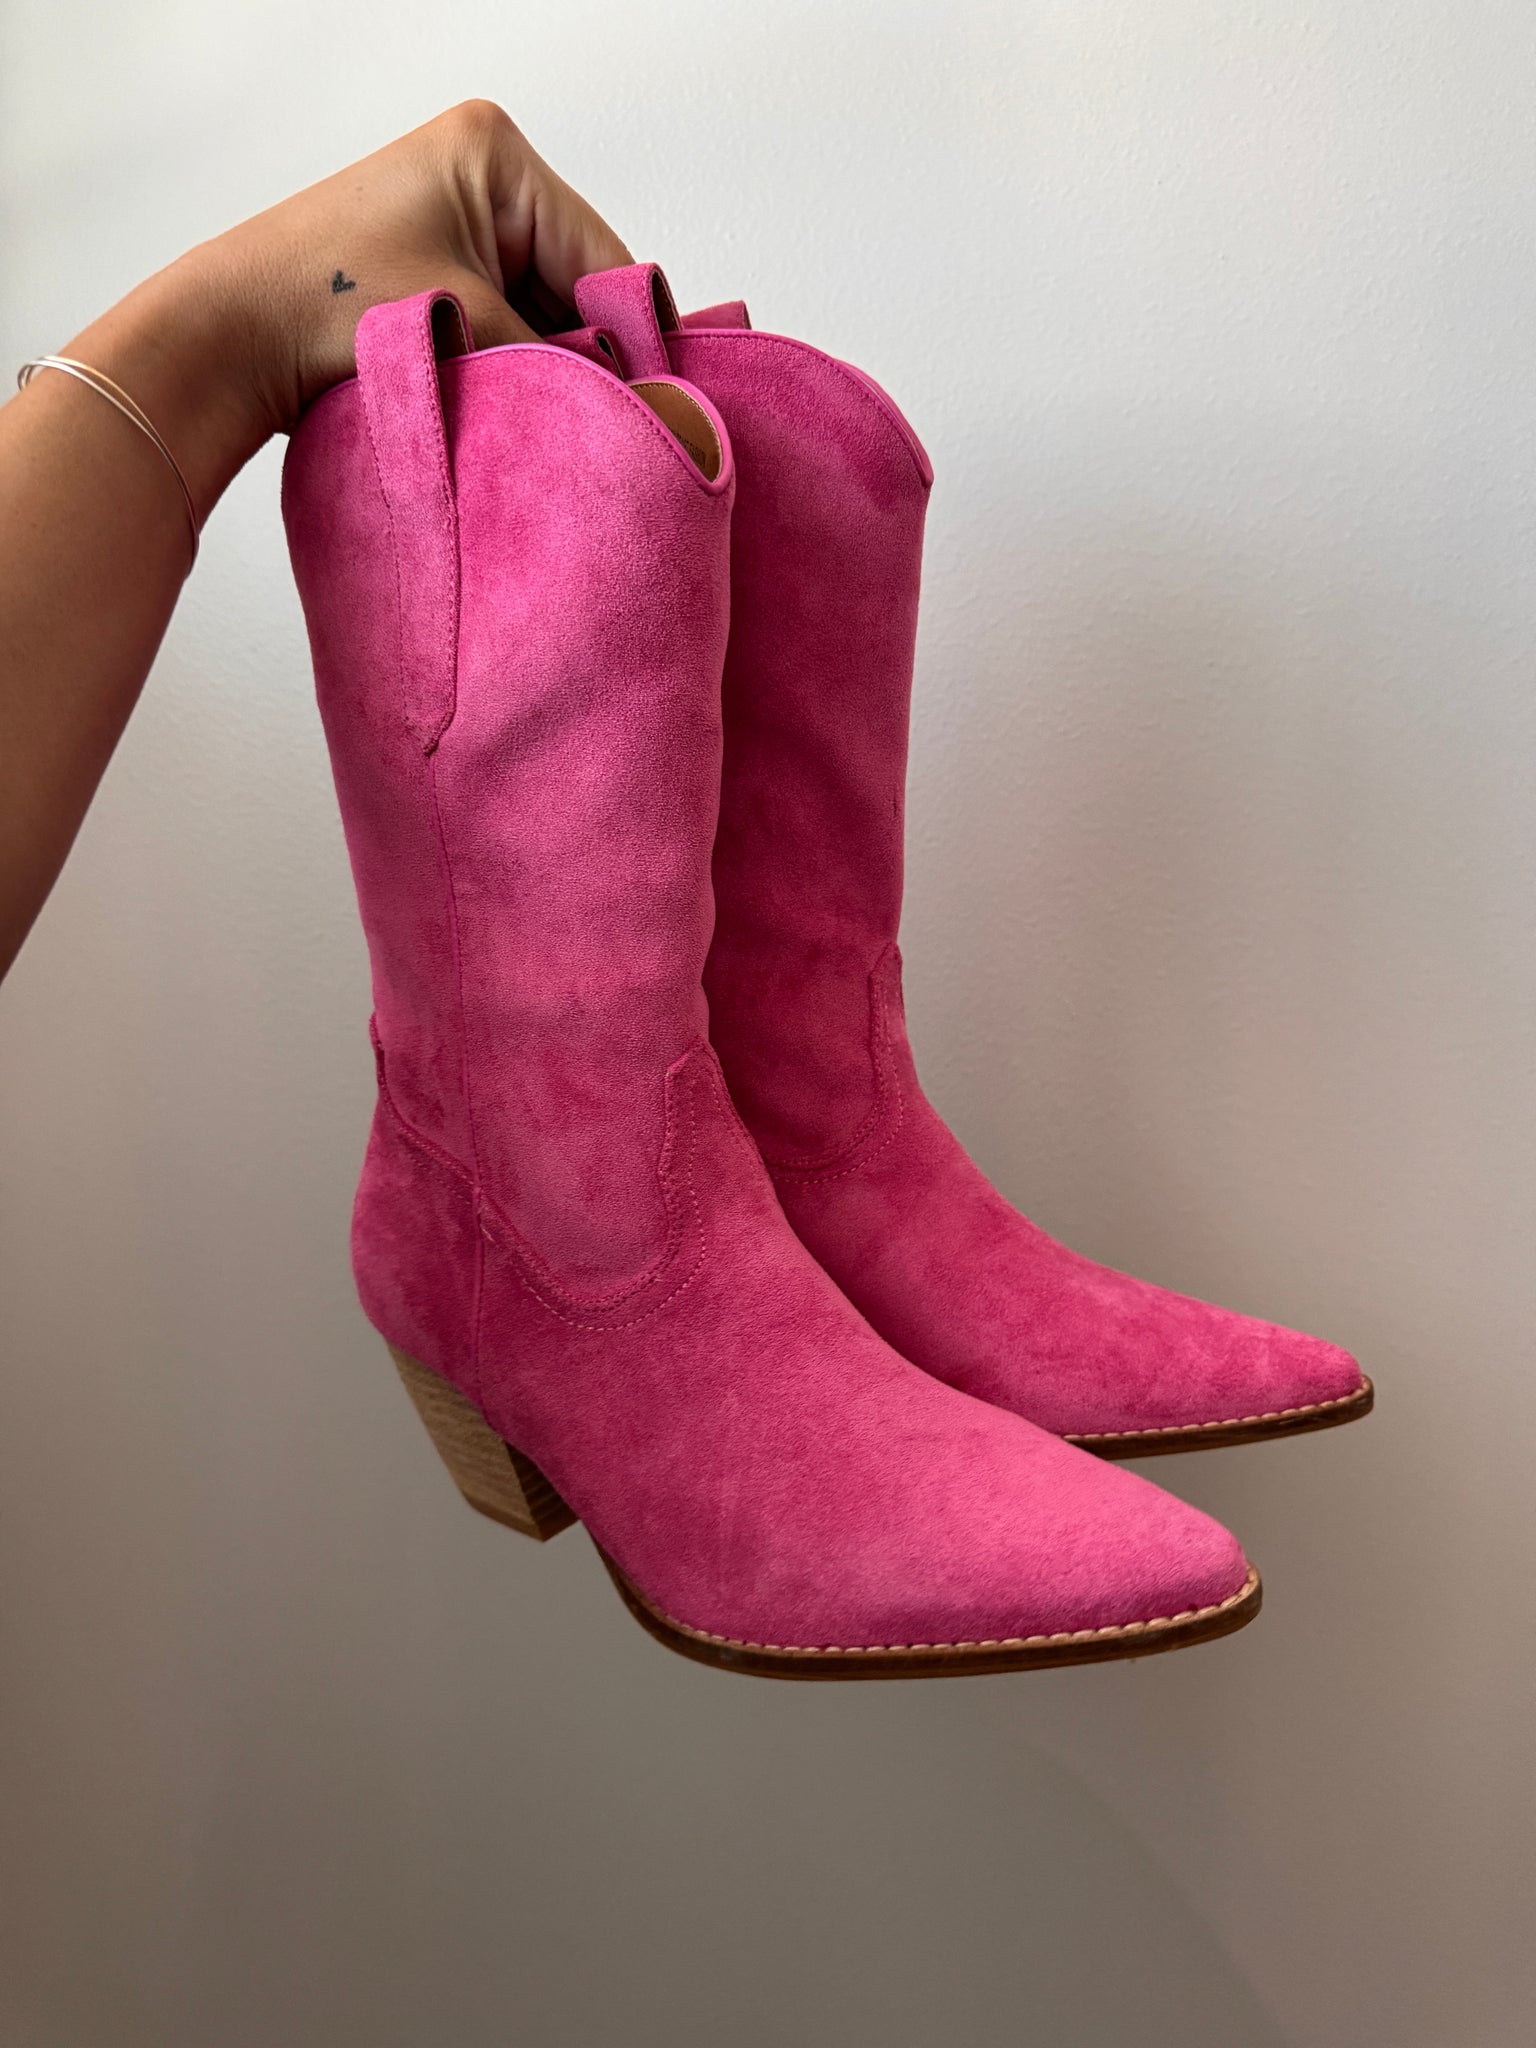 Pink boots made for walkin